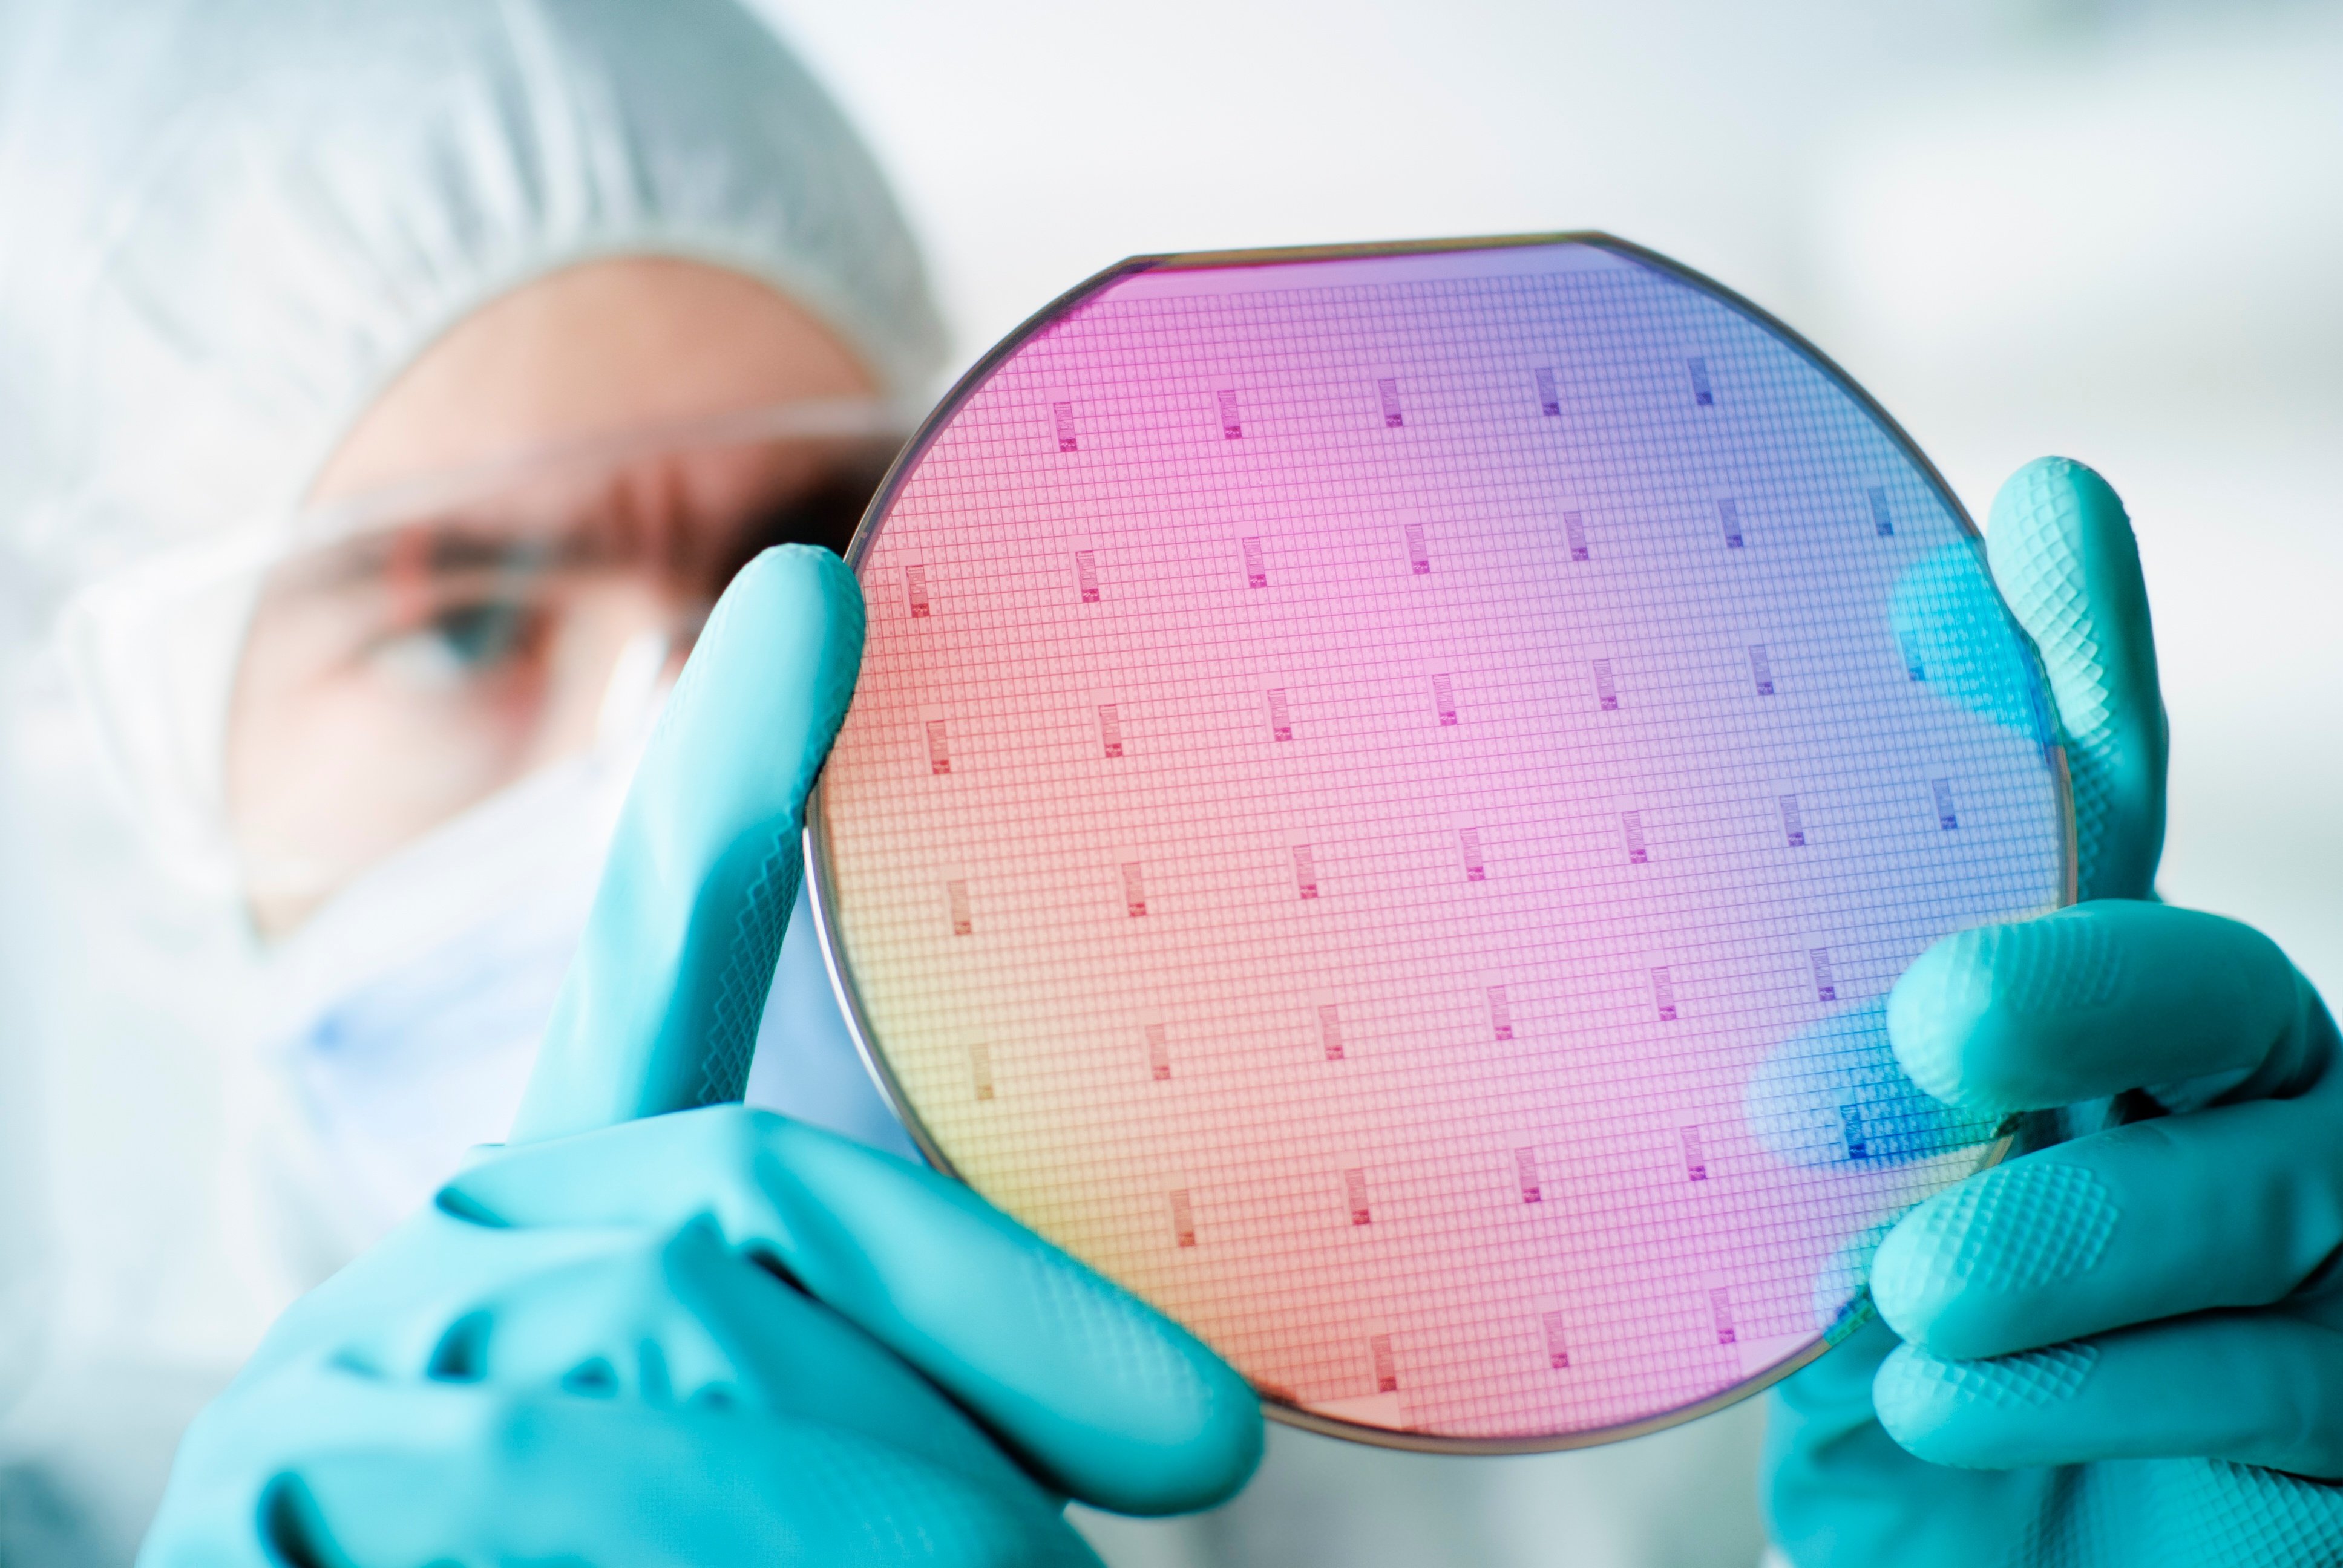 Silicon-Wafer-000015524880_Large.jpg